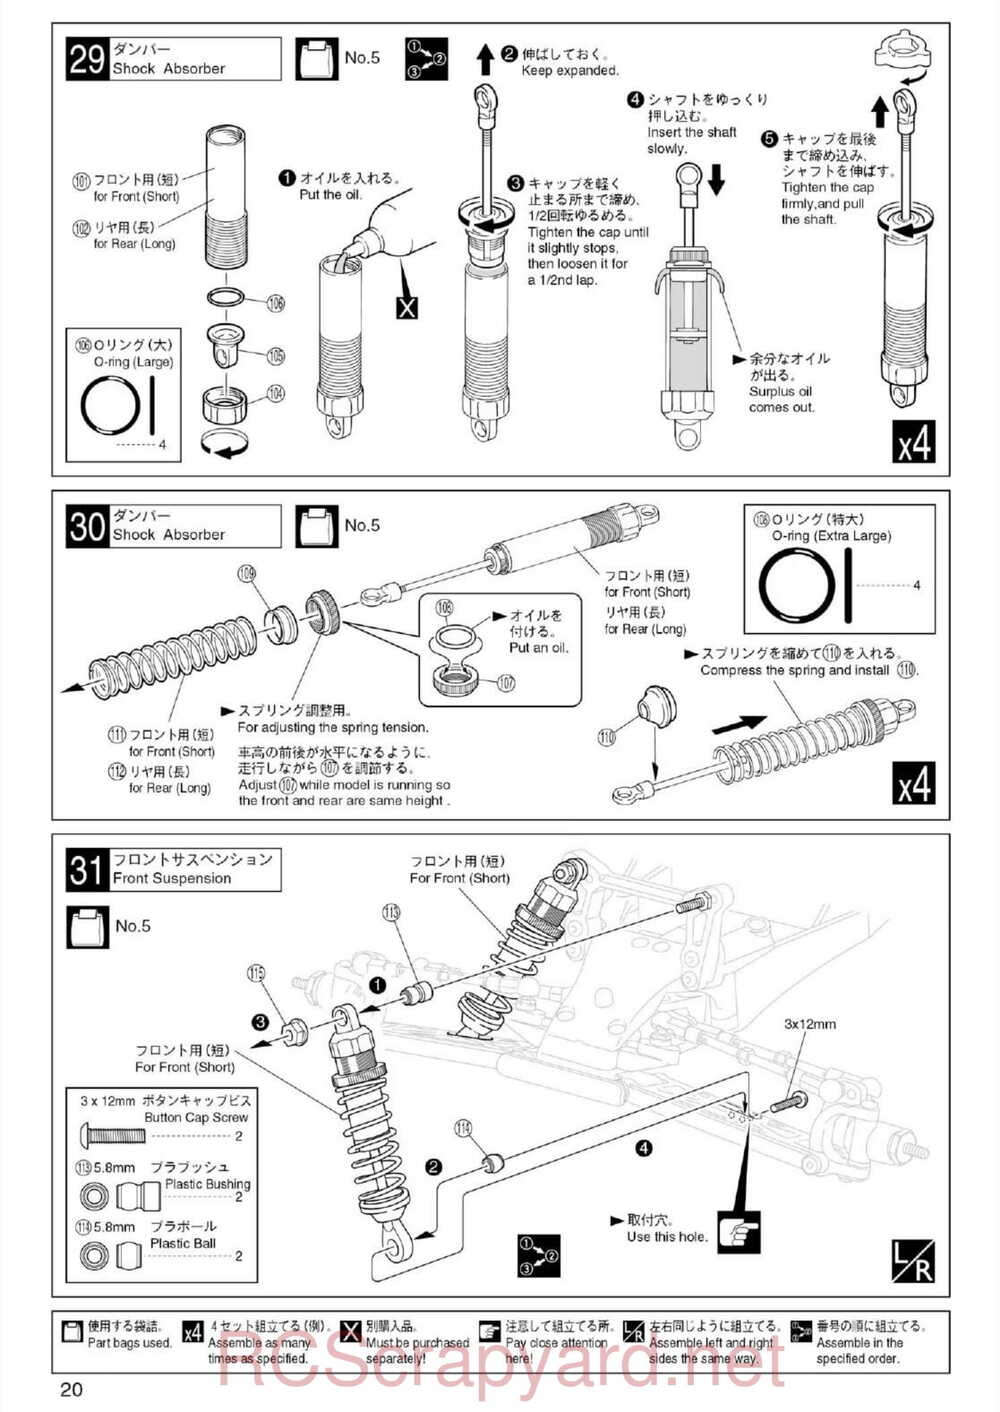 Kyosho - 30074 - Ultima-RB5 - Manual - Page 20